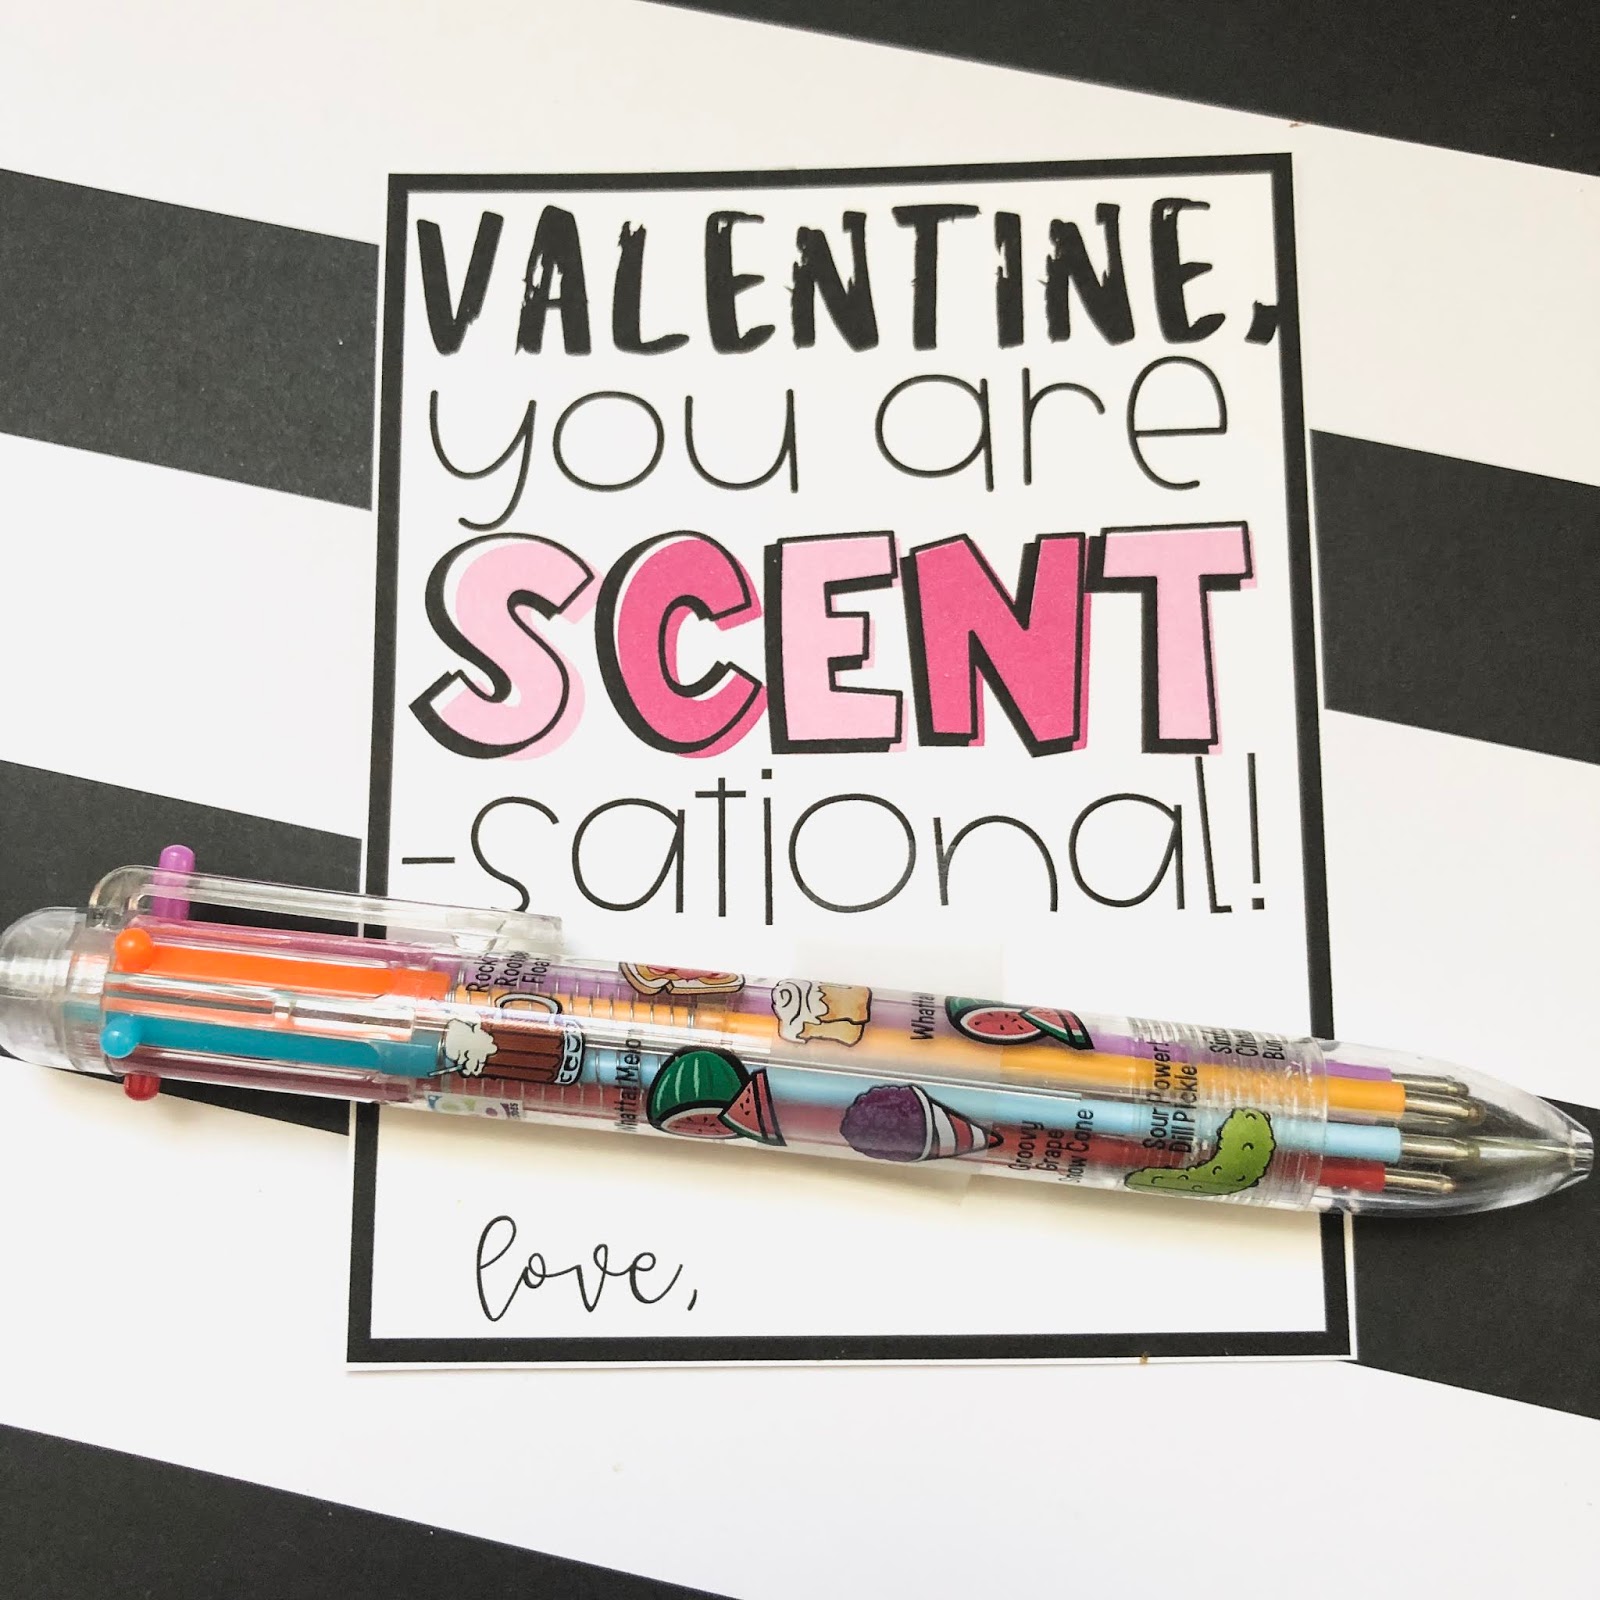 This Valentines Day gift for kids is a really fun, easy, and cheap